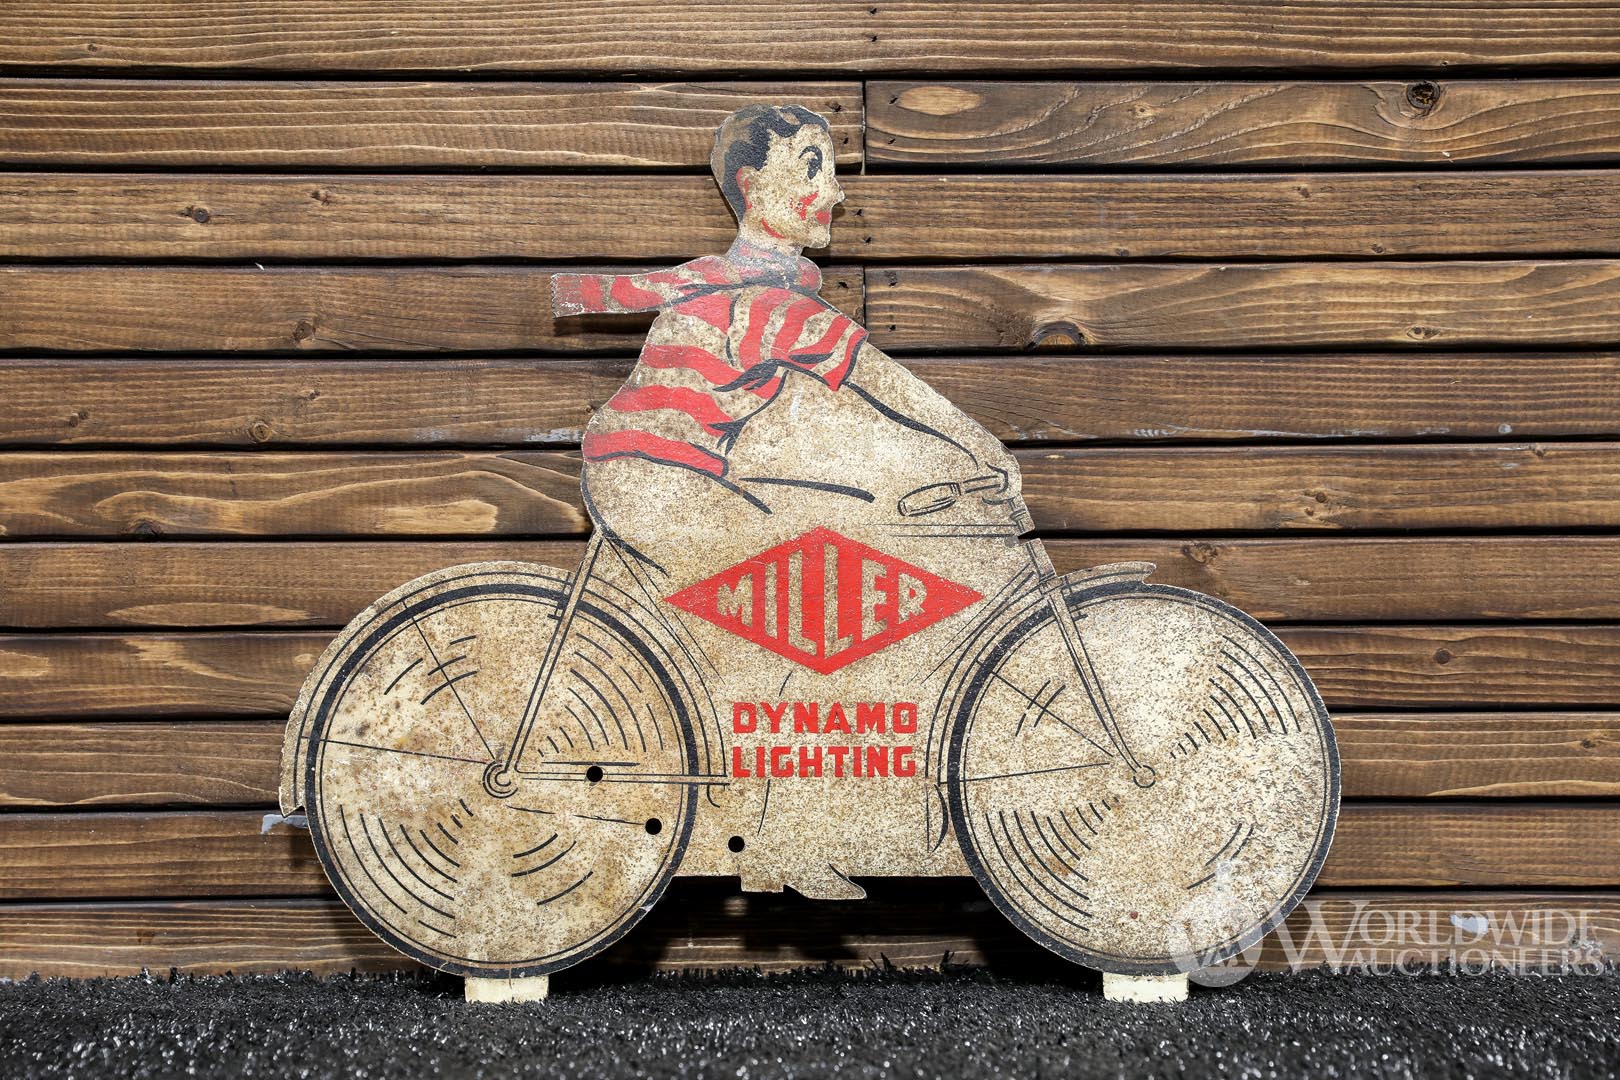 1910s Miller Dynamo Lighting Bicycle Cut-Out Tin Sign 